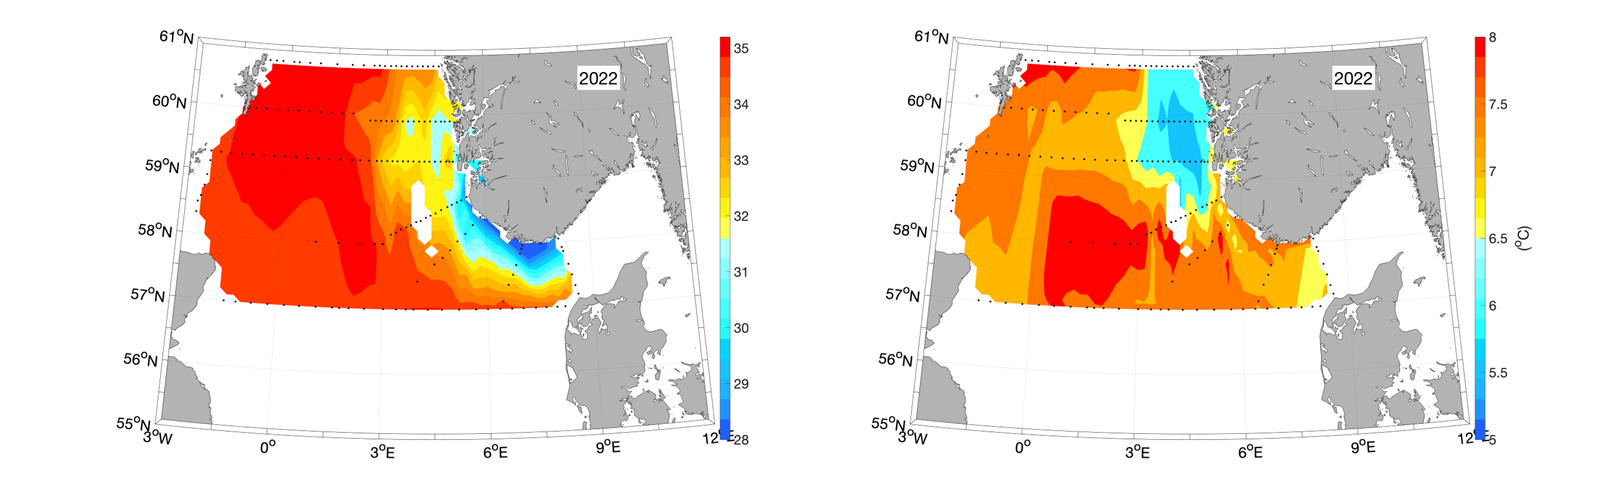 Salinity (left panel) and temperature (right panel, in oC) at 10m depth based on the hydrographic stations (marked with black dots) taken between 14/4 and 26/4/2022